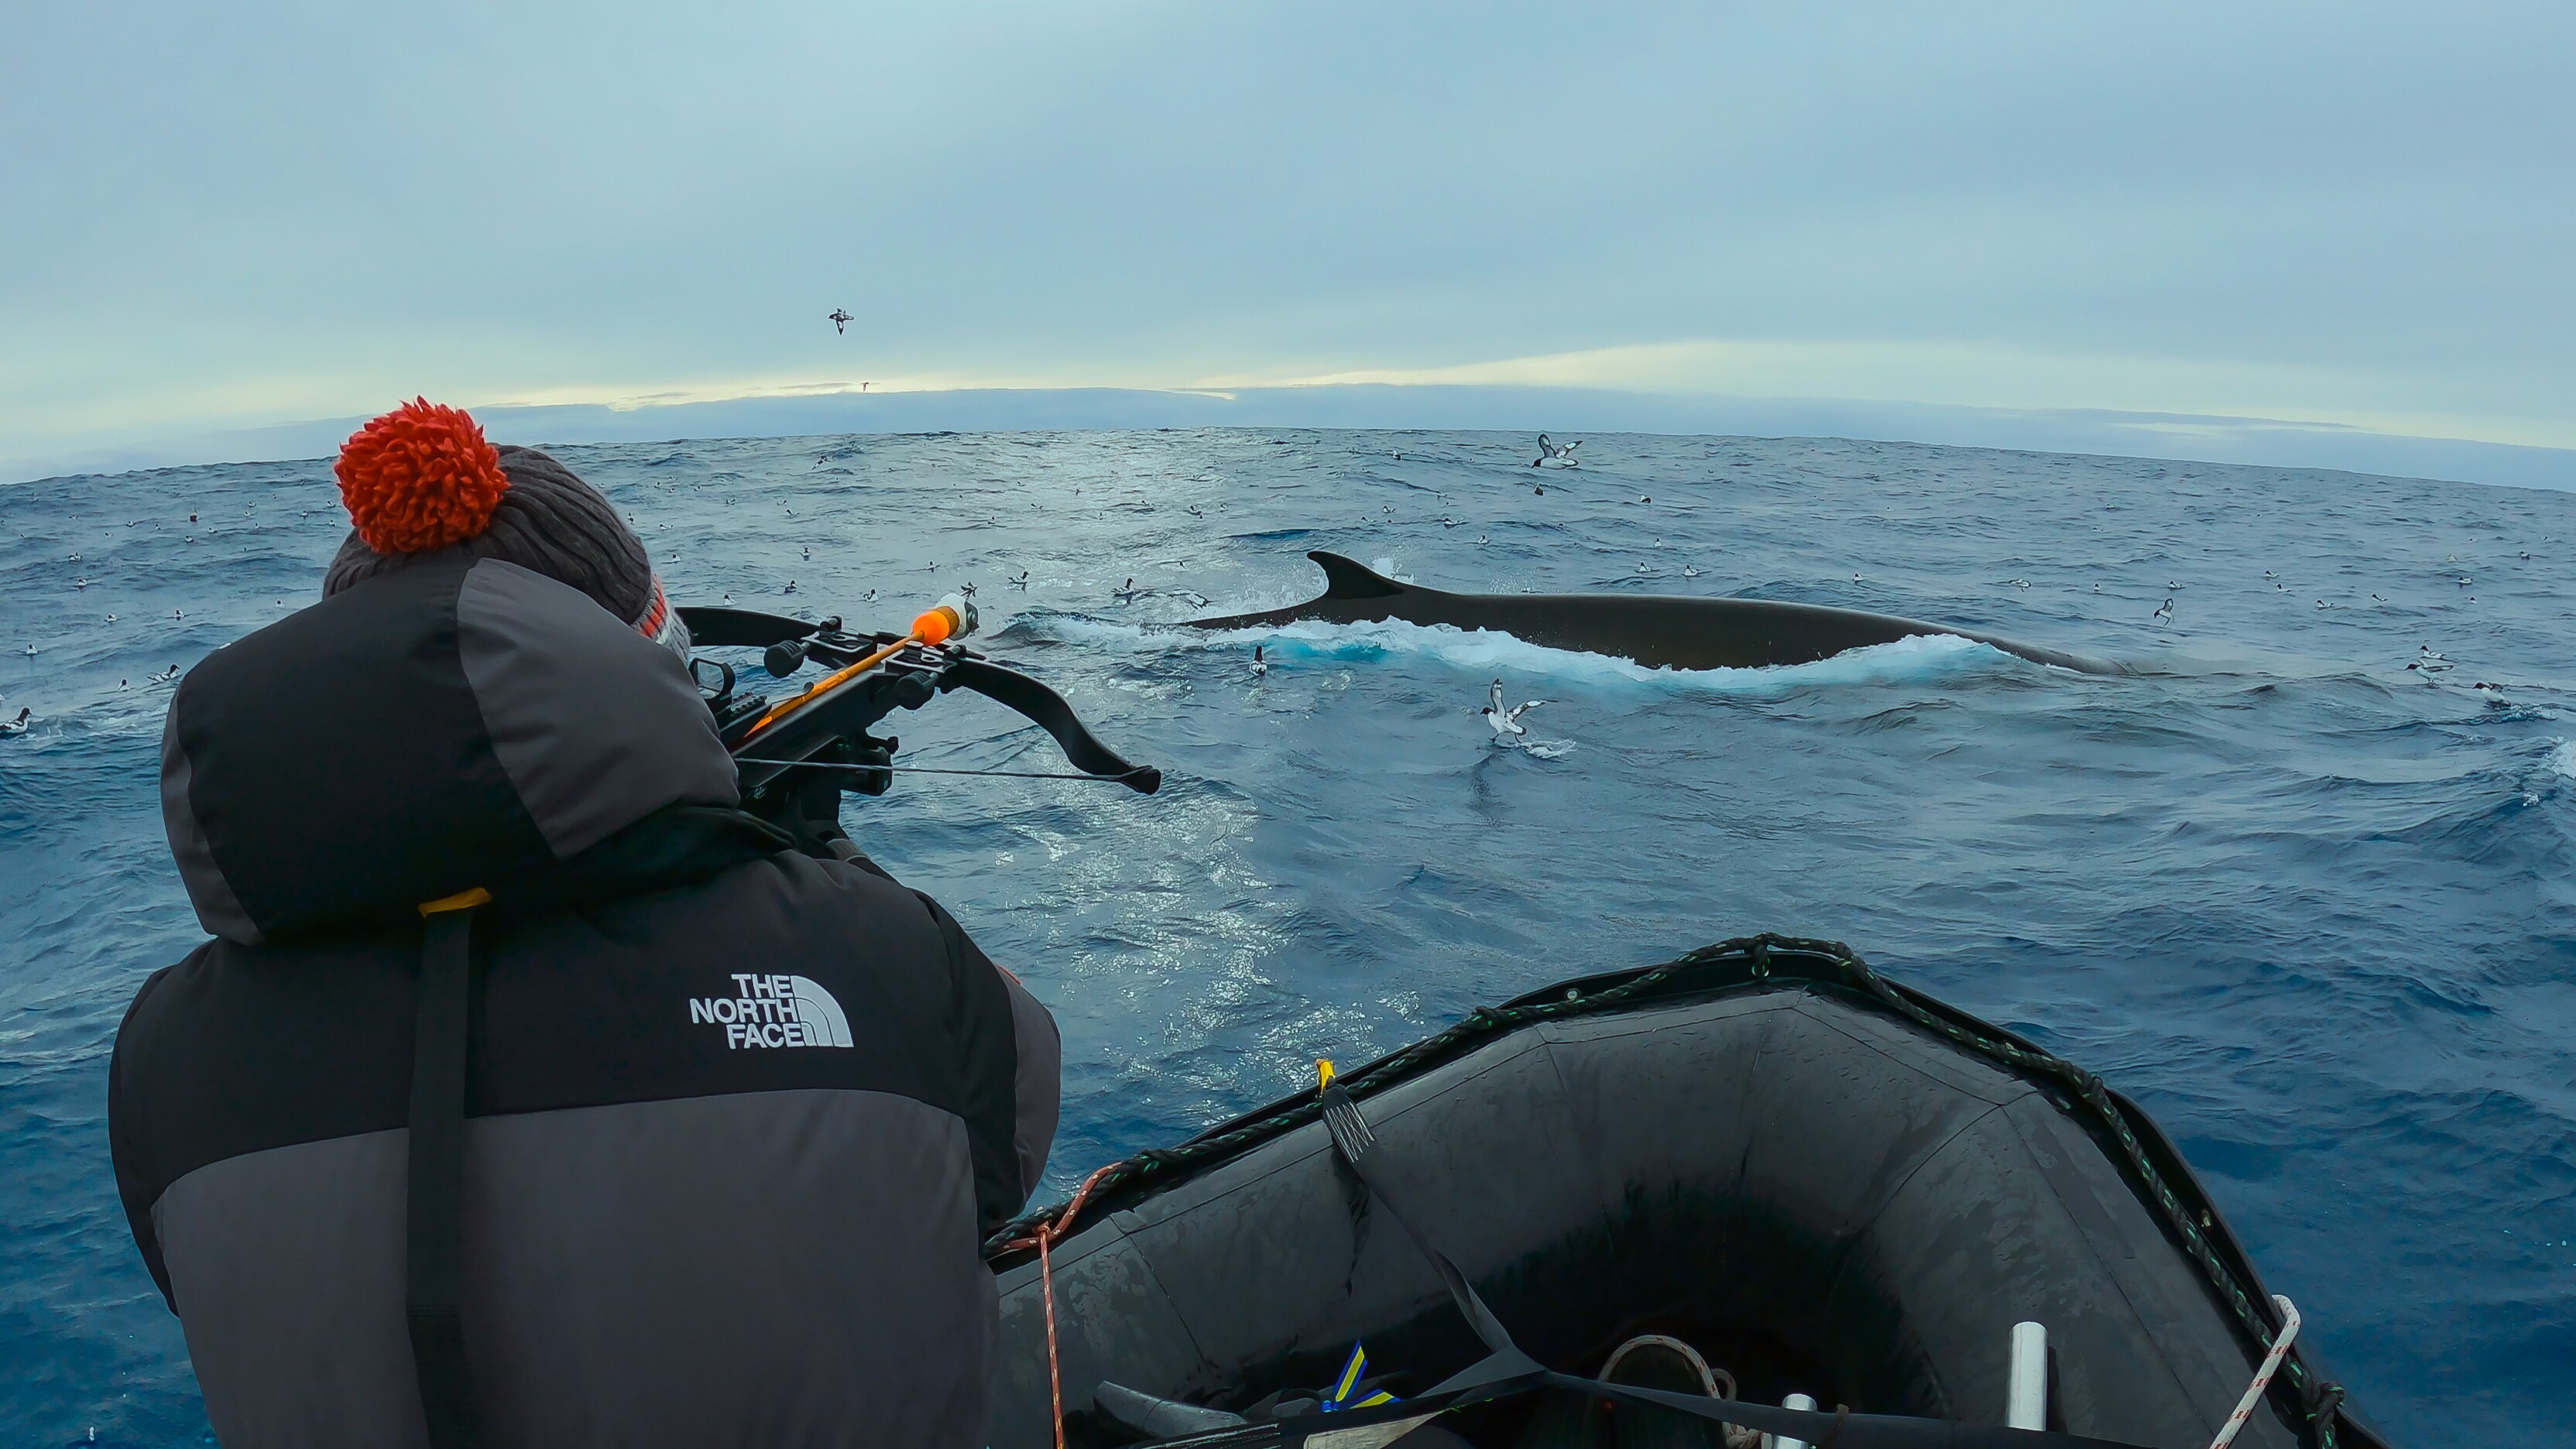 Scientist, Leigh Hickmott, tries to shoot a harmless tag into a whale's fin to collect important data. (Credit: National Geographic/Bertie Gregory for Disney+)